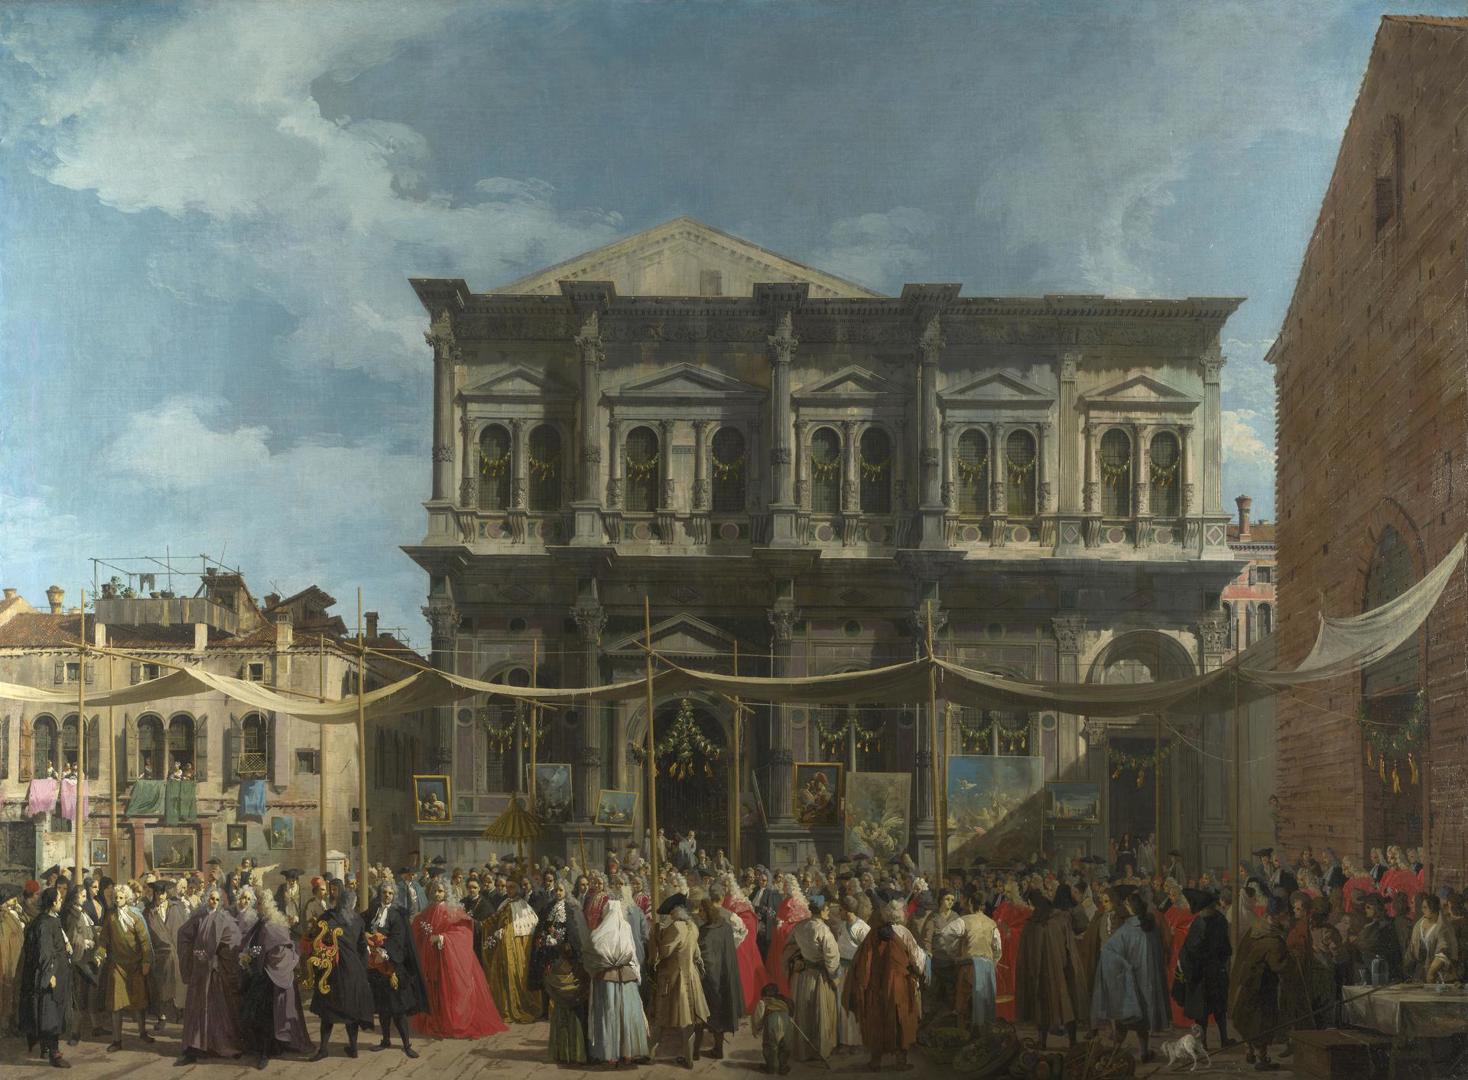 Venice: The Feast Day of Saint Roch by Canaletto